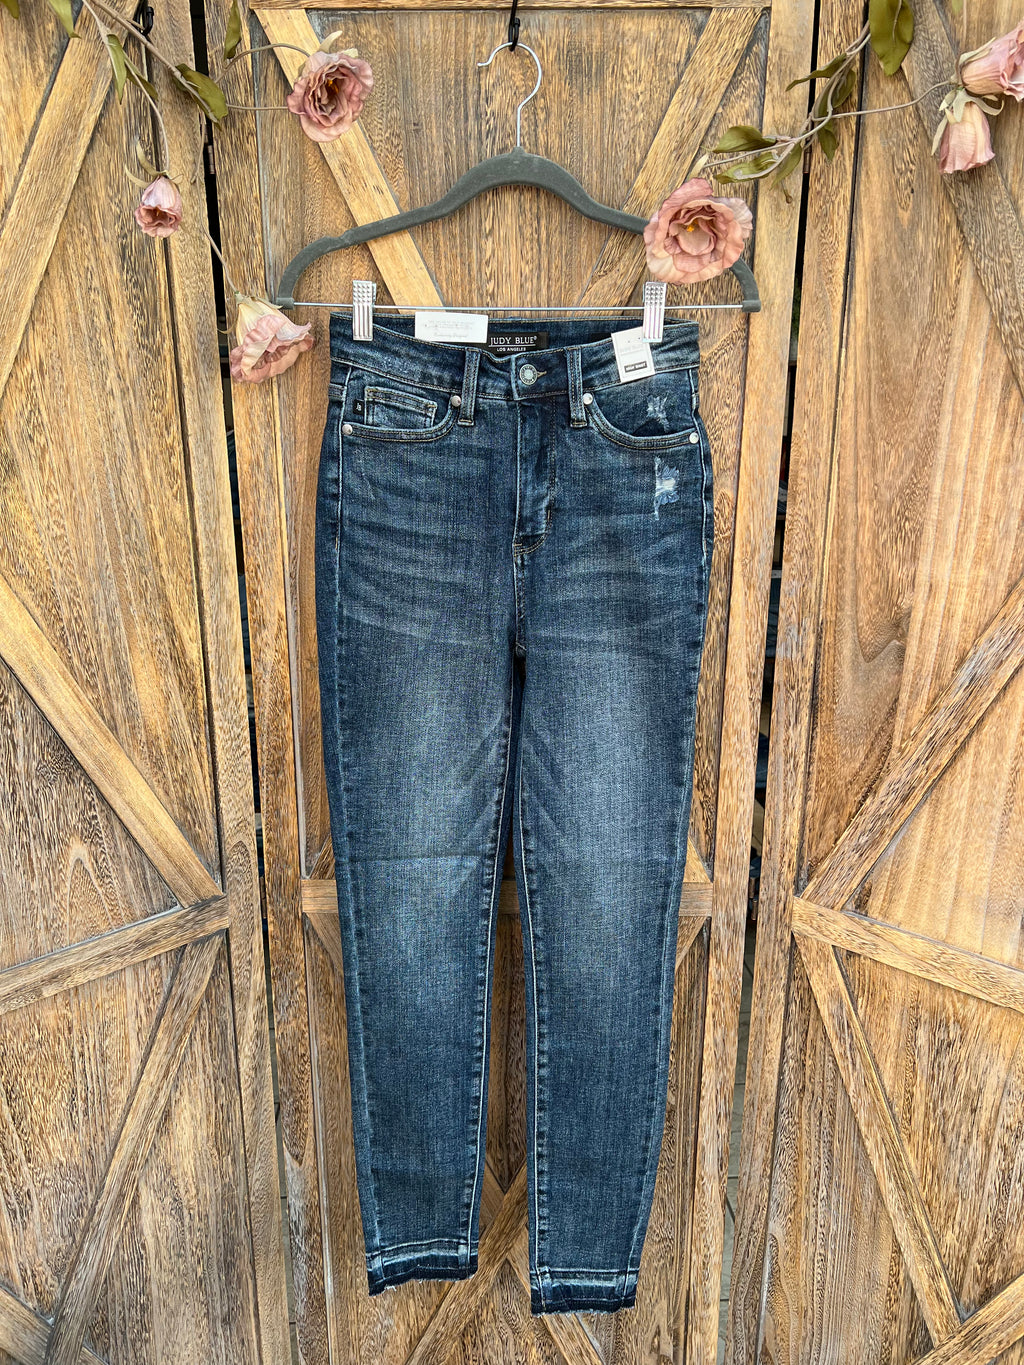 : Chrissy Plus High Waist Judy Blue Skinny Jeans - Catching Fireflies Boutique